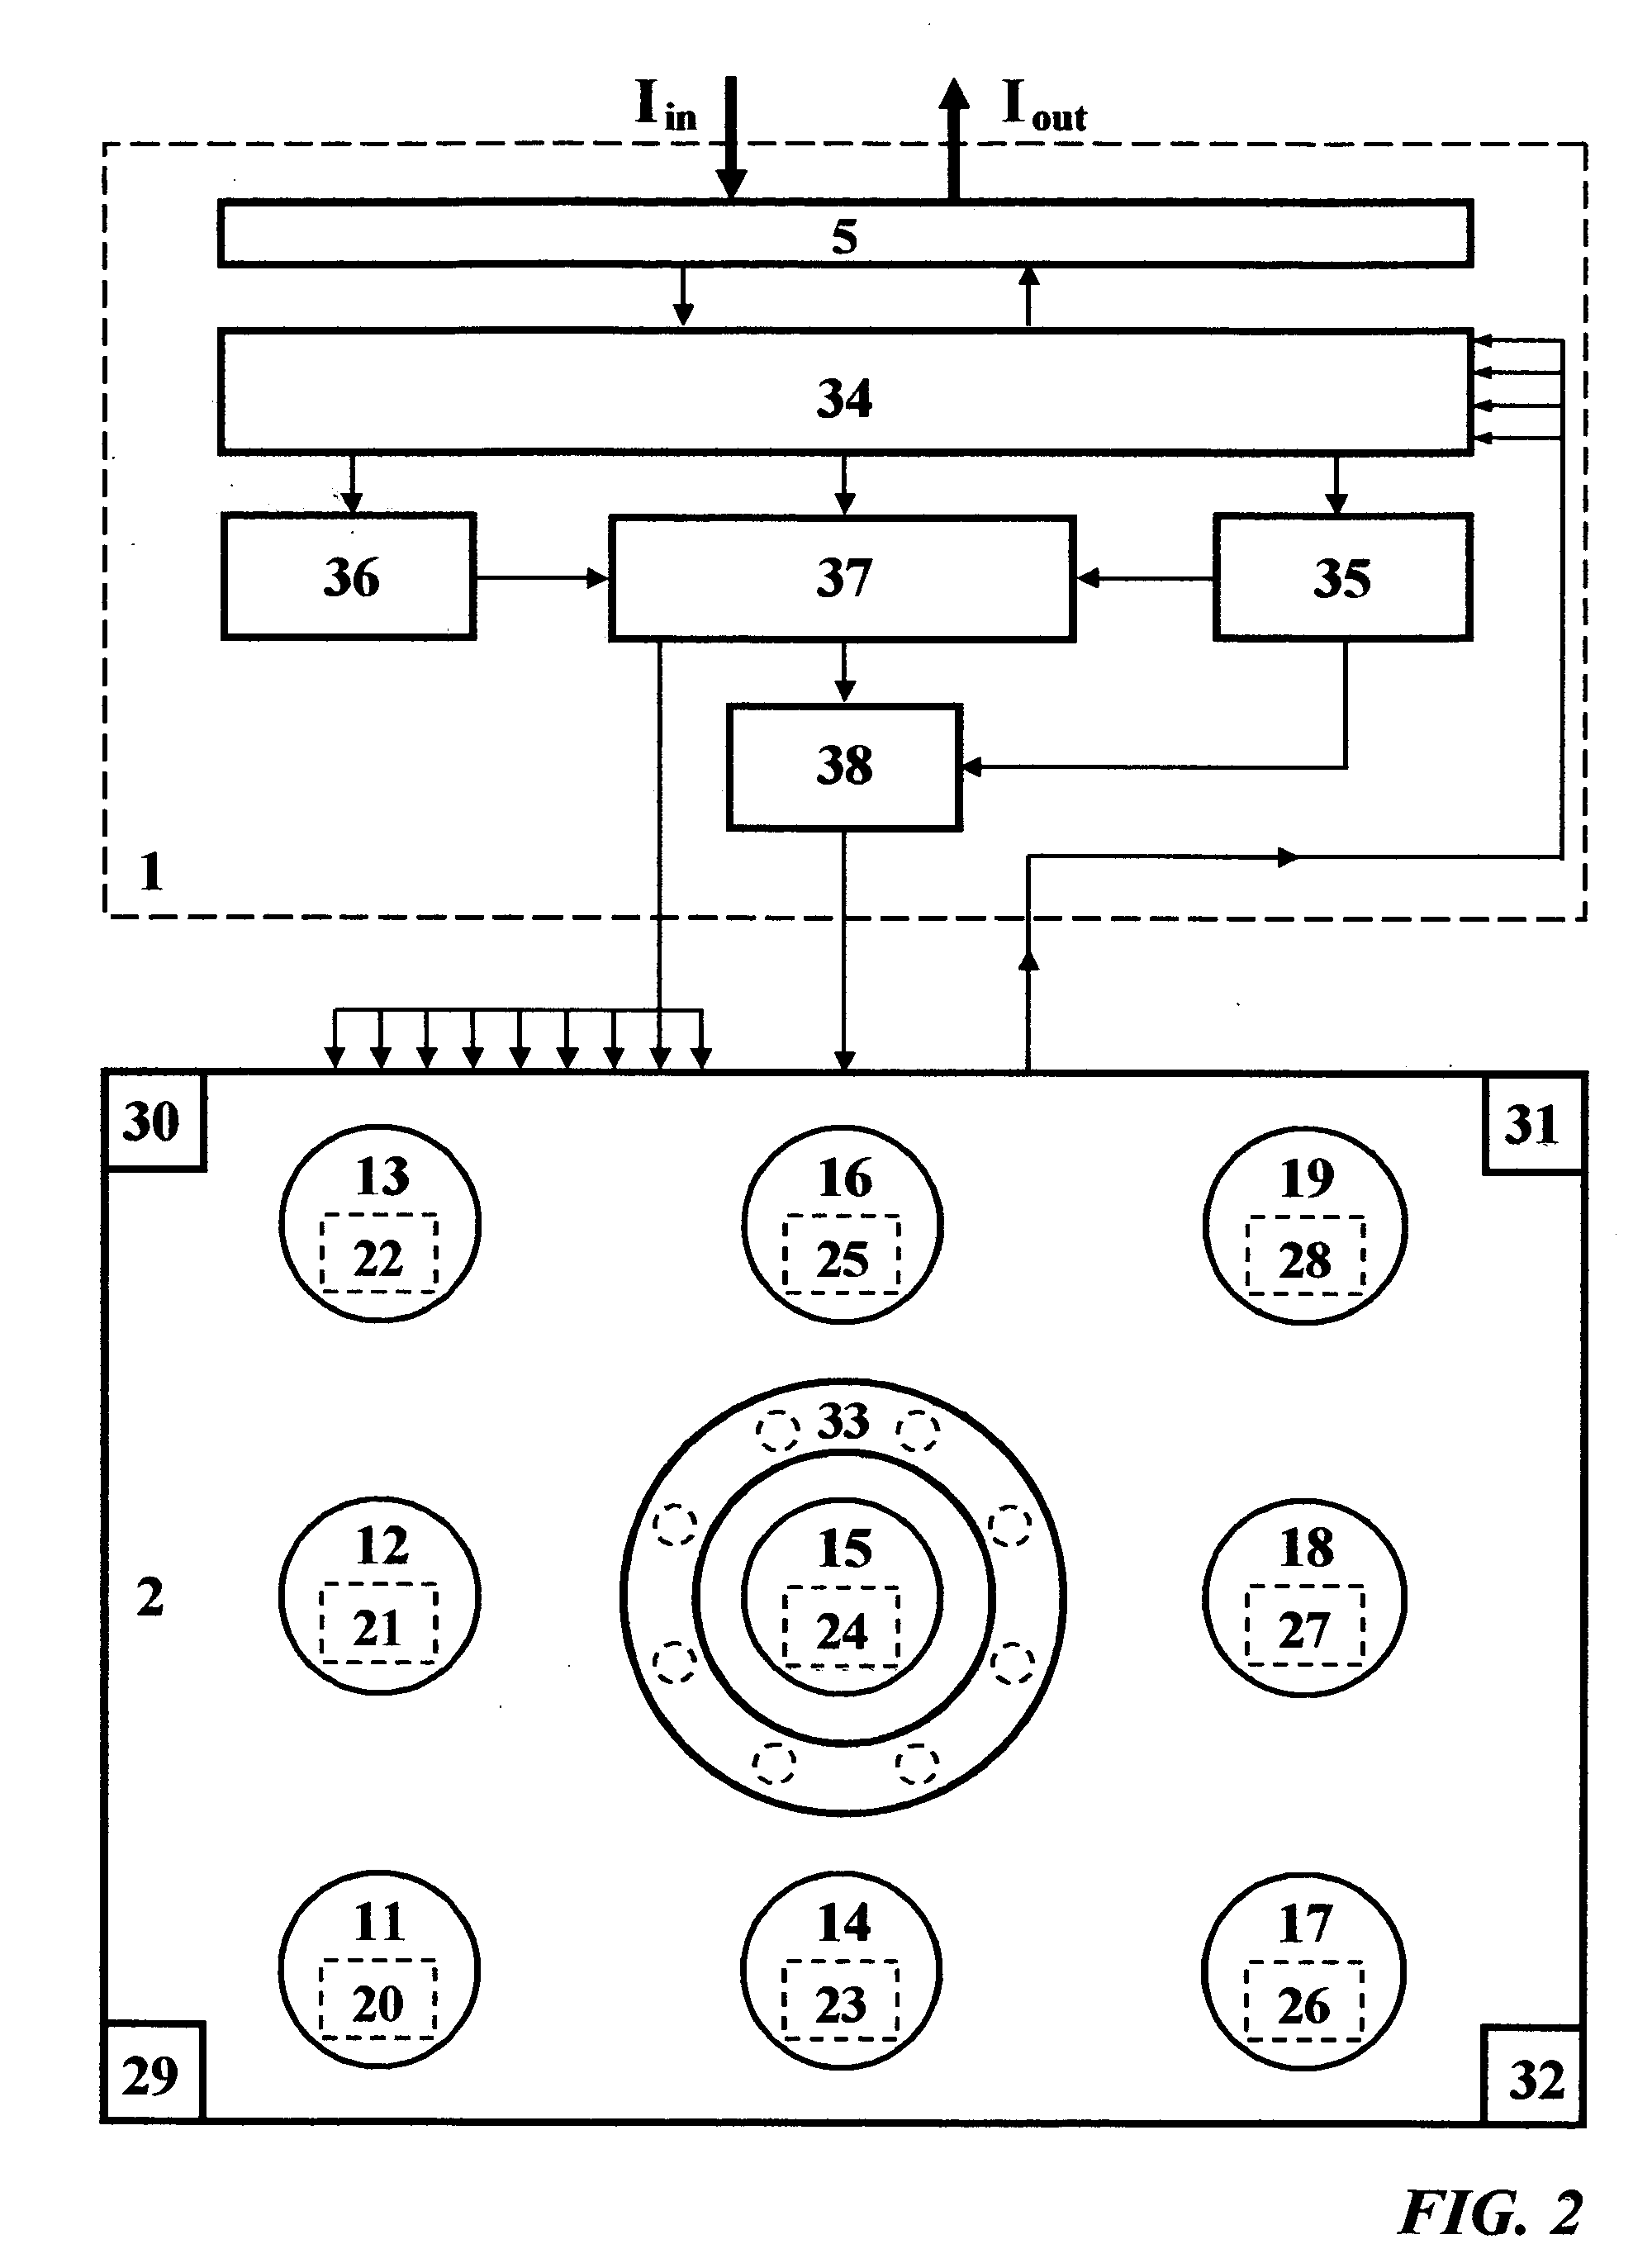 Method of dynamic binary temperature therapy